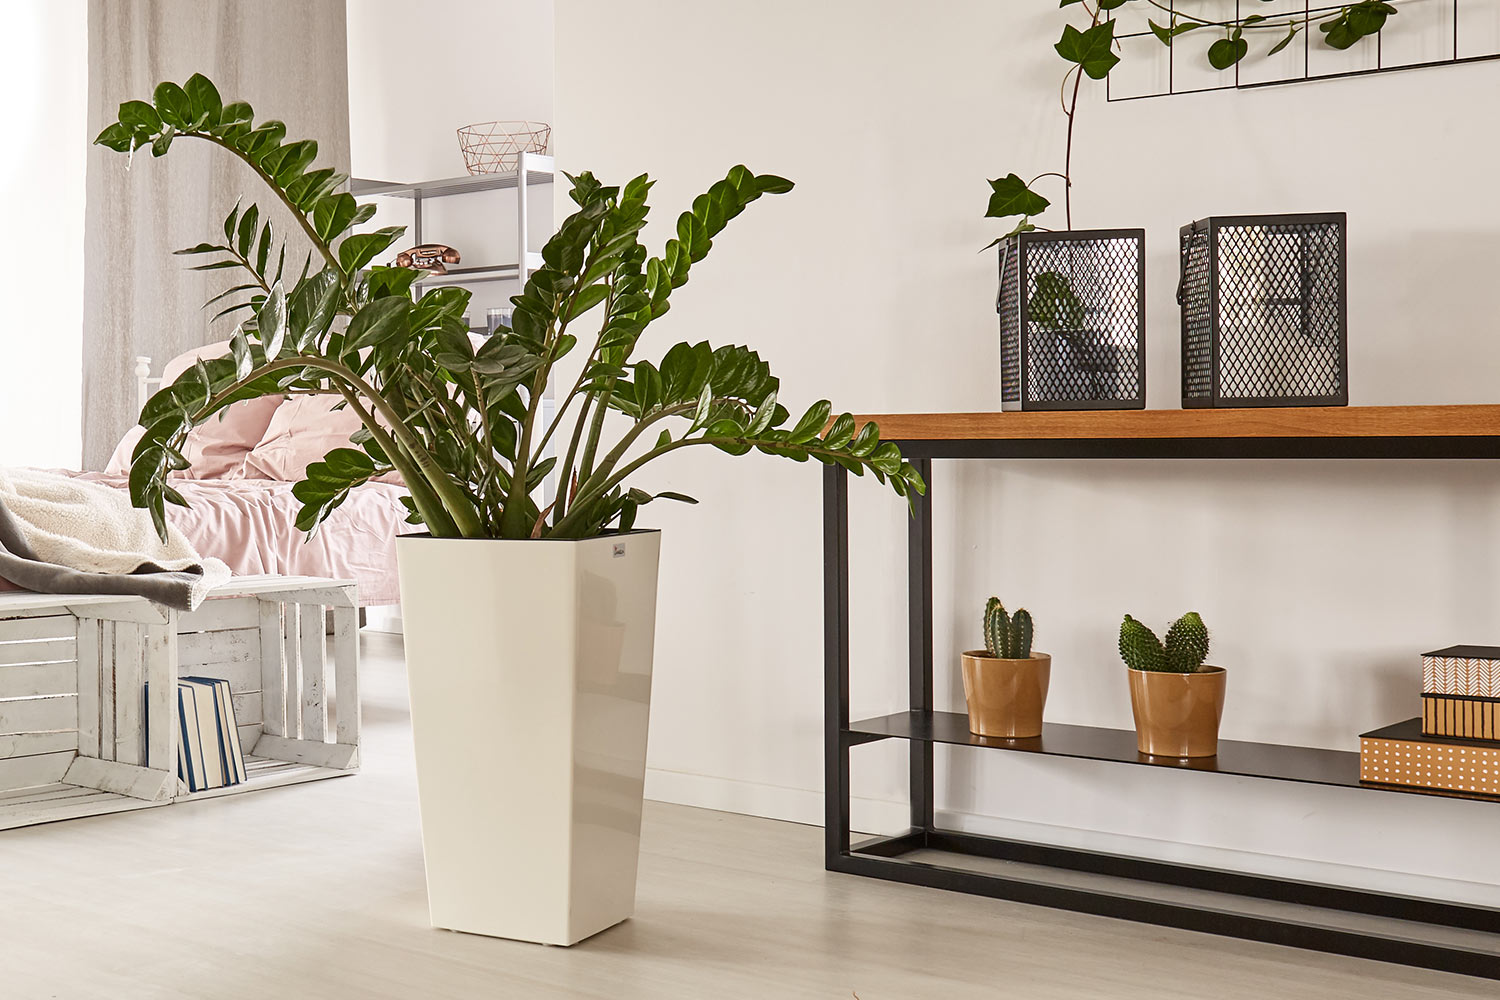 zz plant in square planter next to wooden table with plants and frames